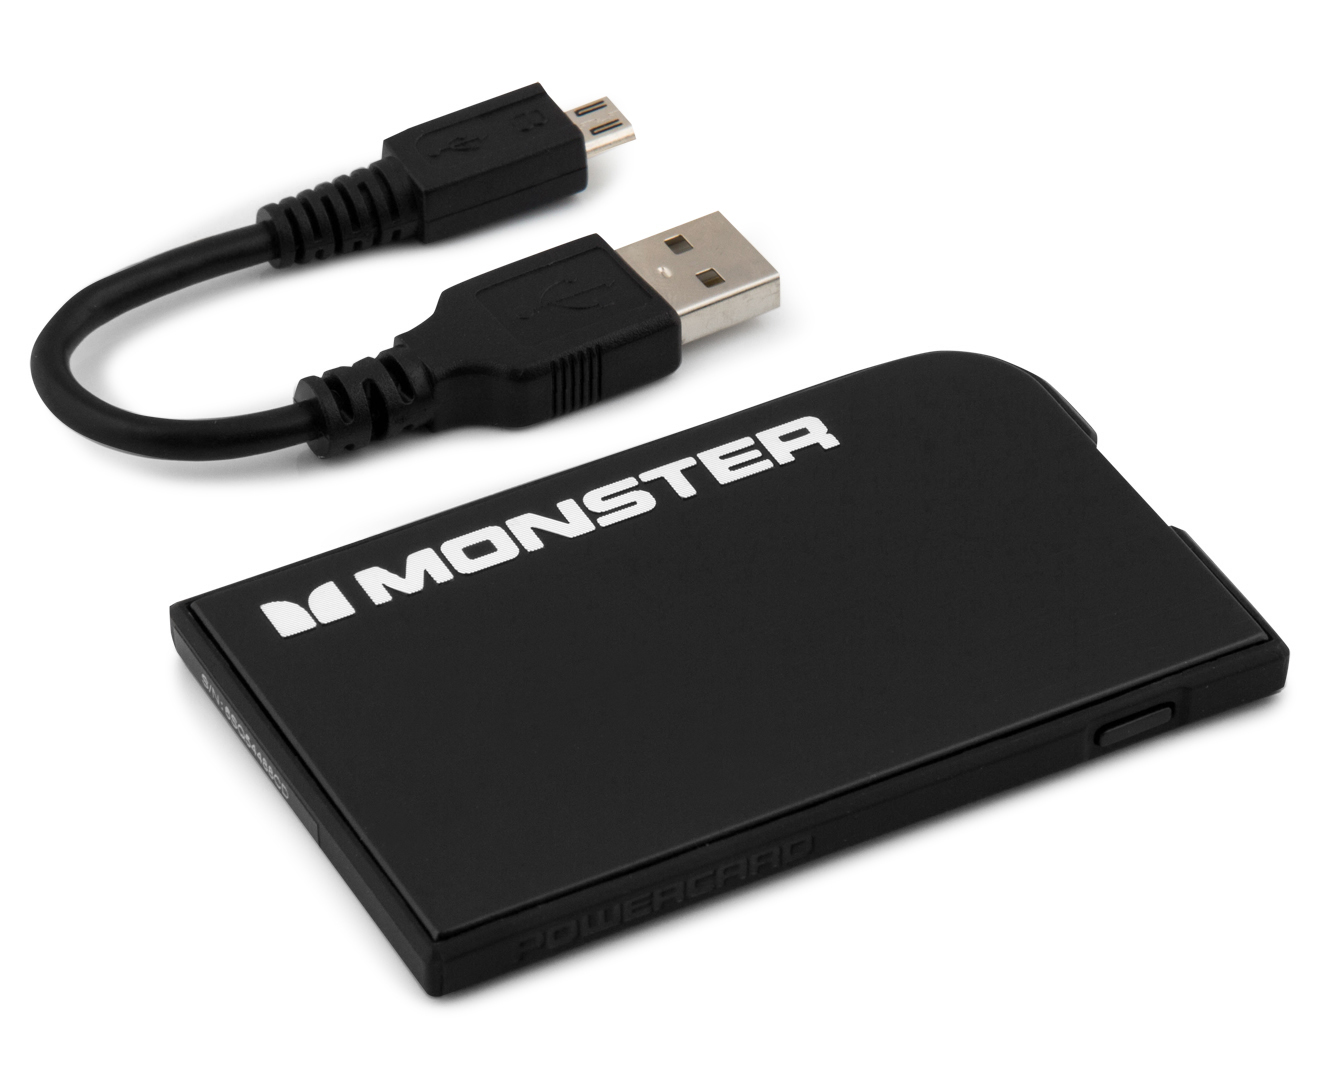 monster powercard smartphone charger